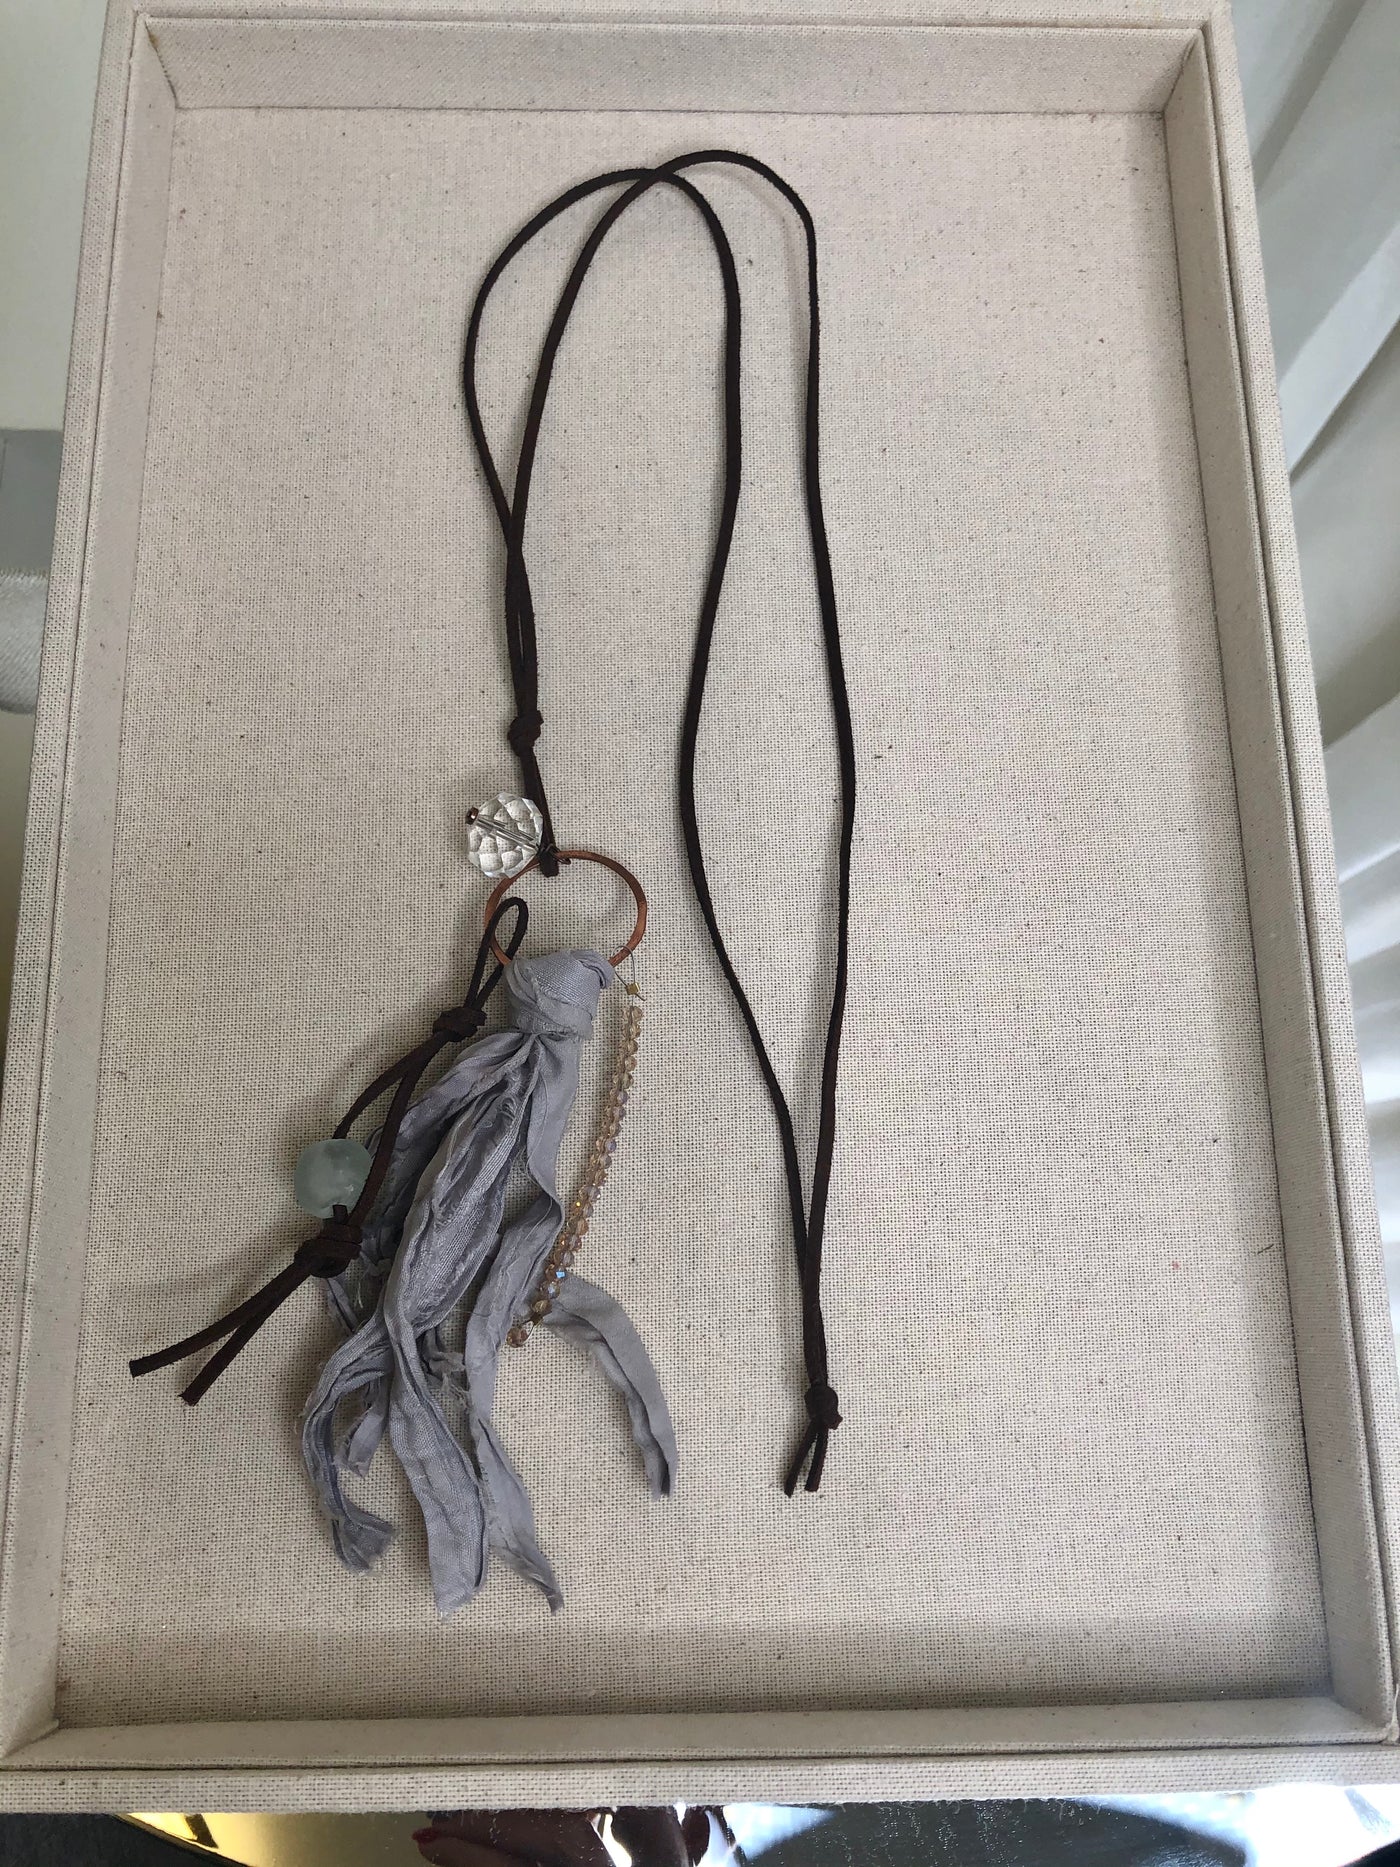 Silk Tassel Necklaces - Corinne an Affordable Women's Clothing Boutique in the US USA